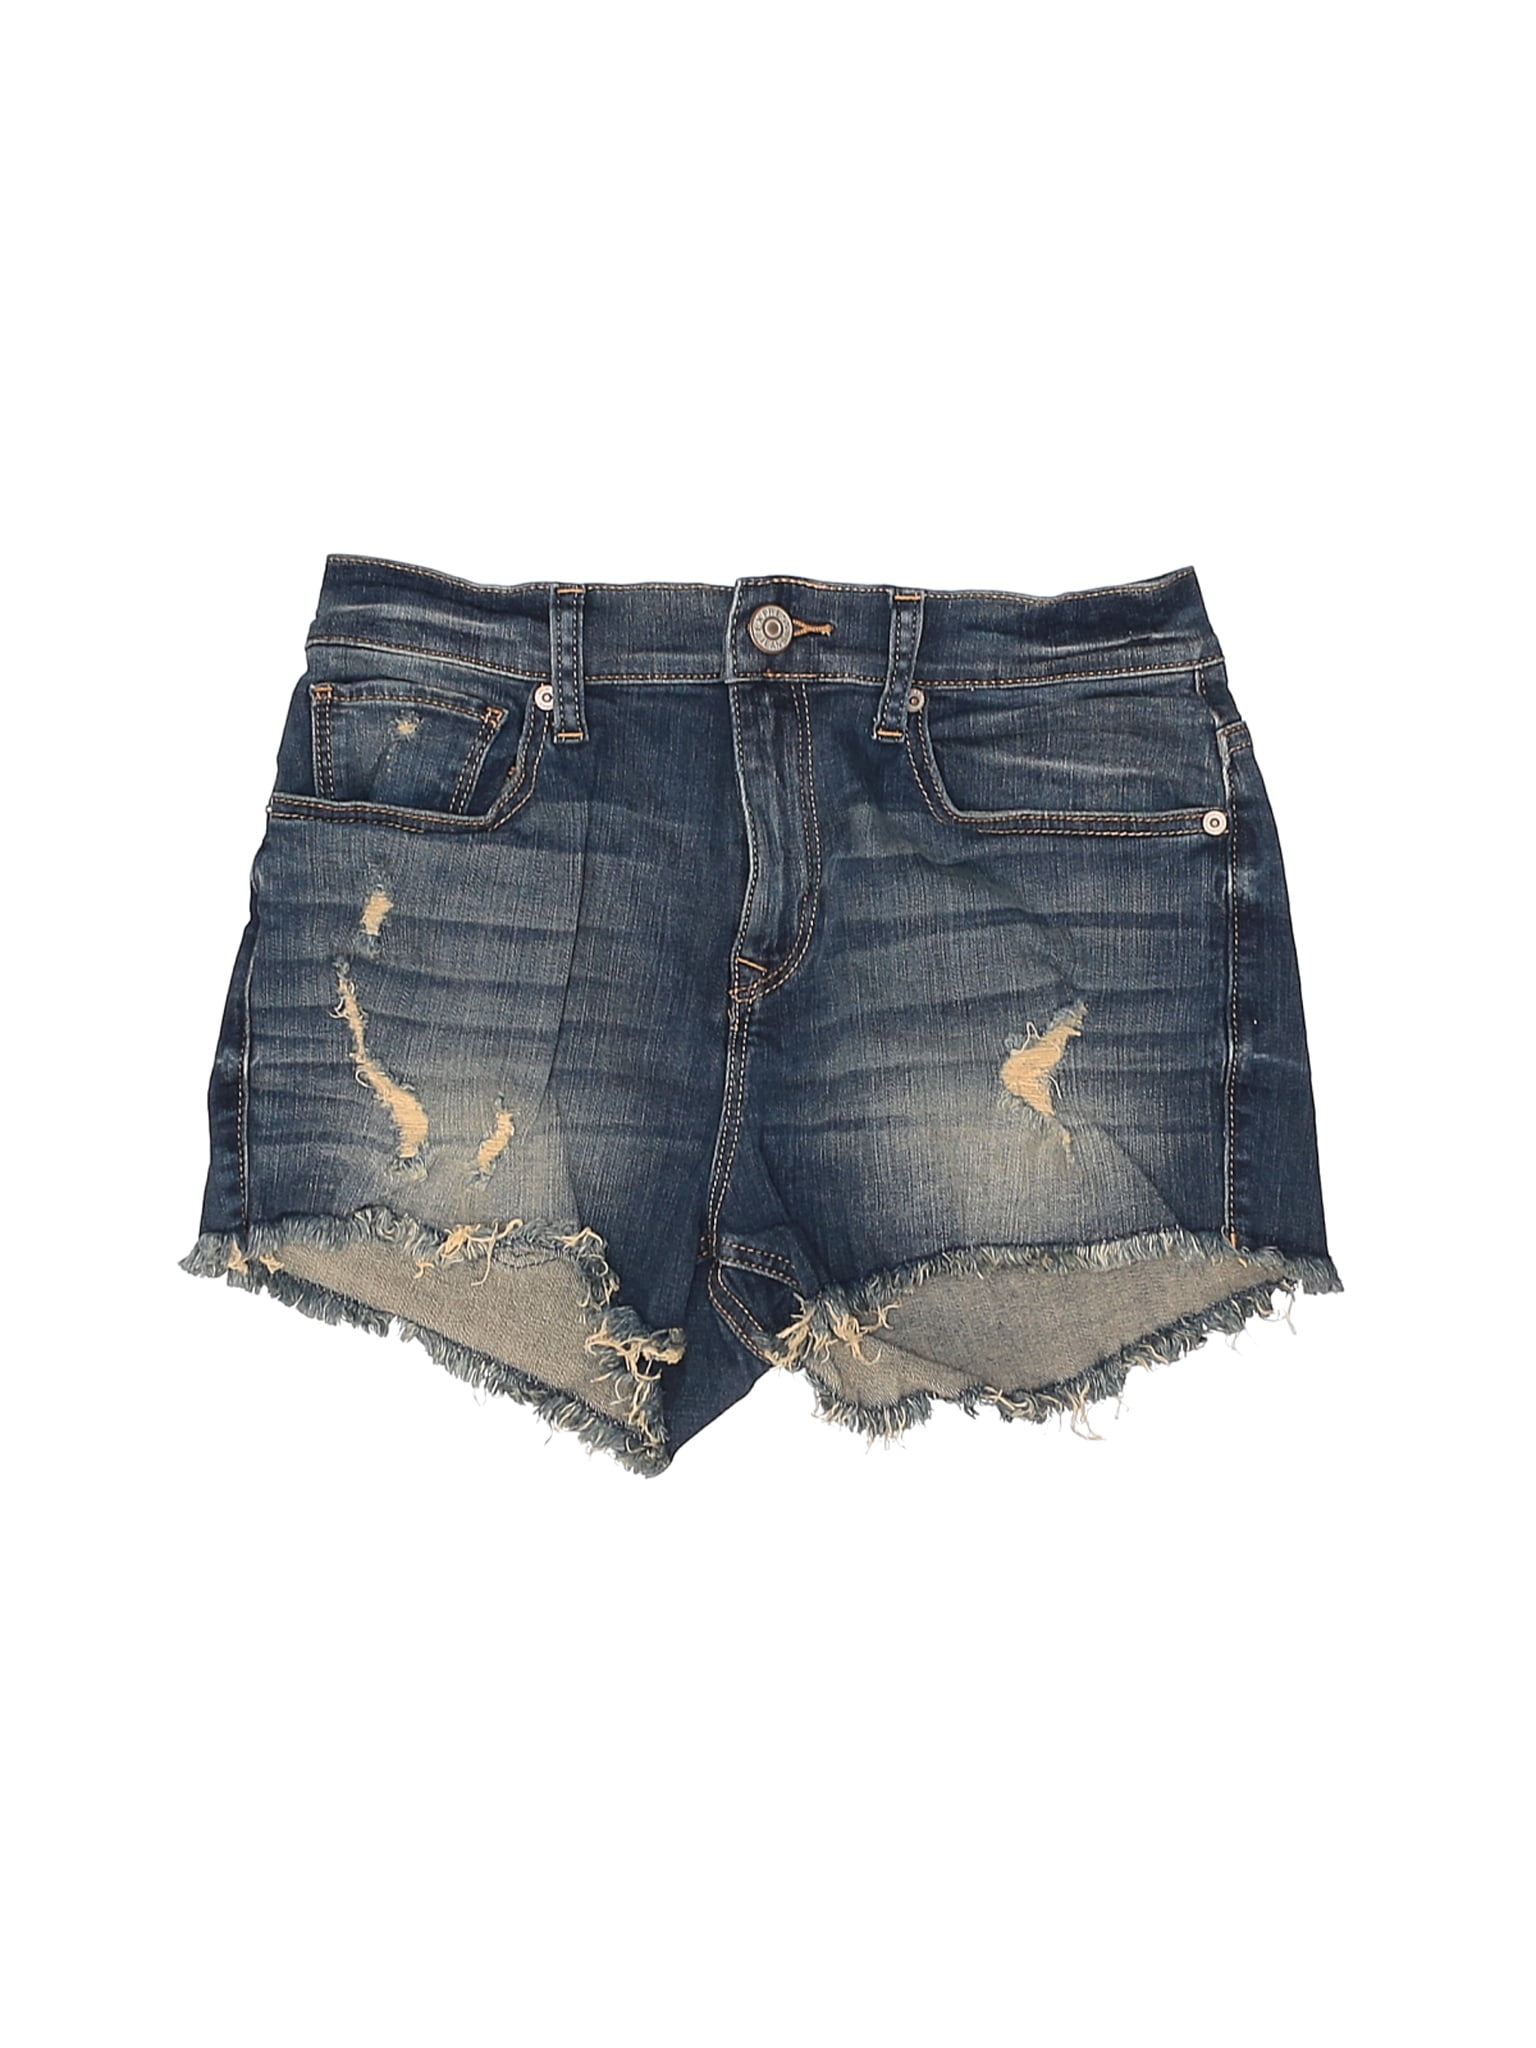 express jeans shorts